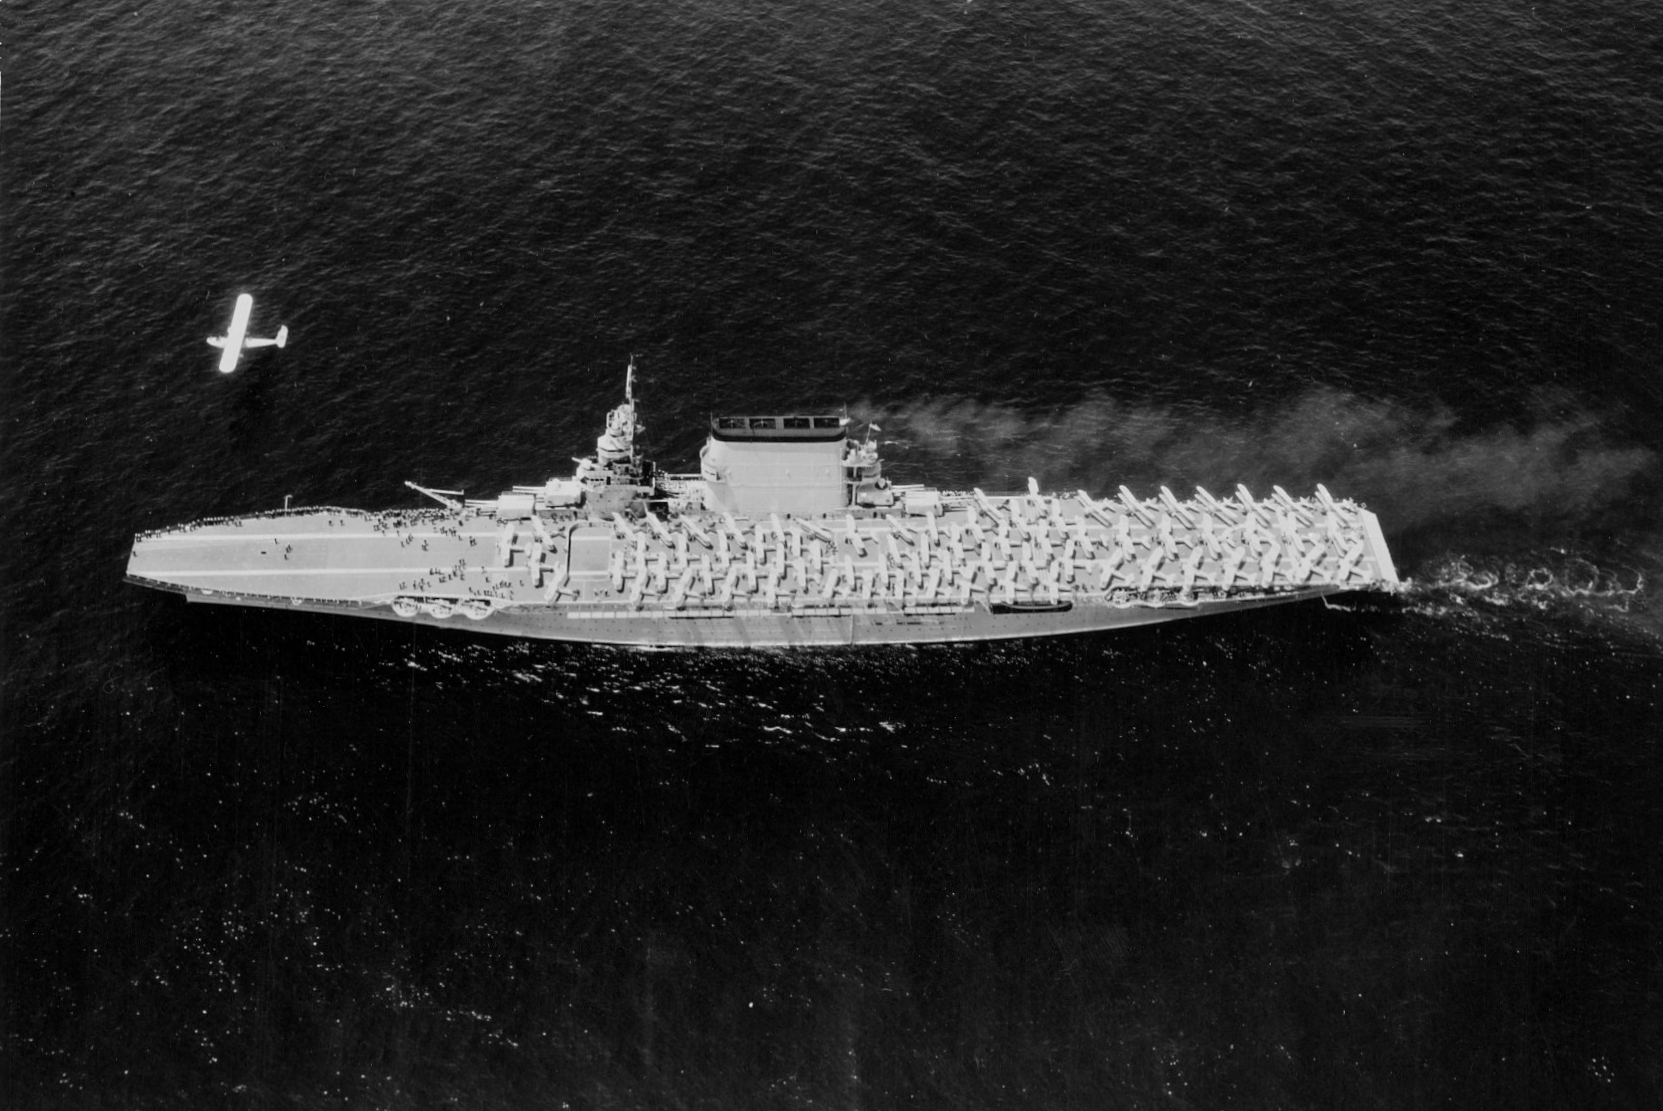 USS Lexington underway, 1930; note P2Y or P3M aircraft flying above the carrier